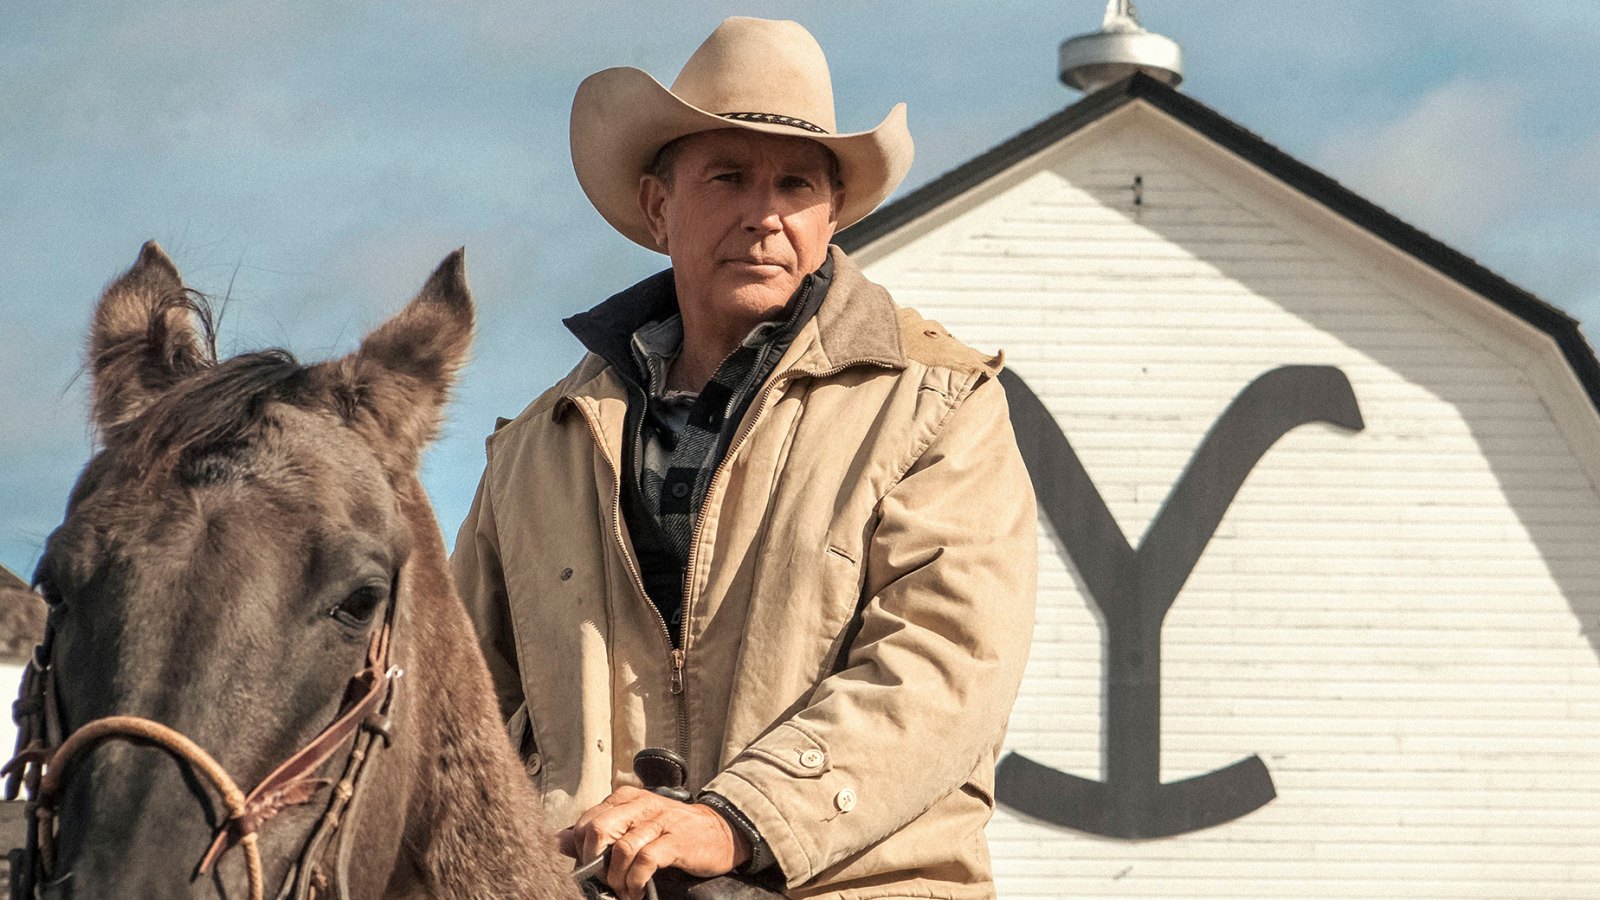 Yellowstone' Officially Ending With Season 5 as Paramount Orders New Sequel Series